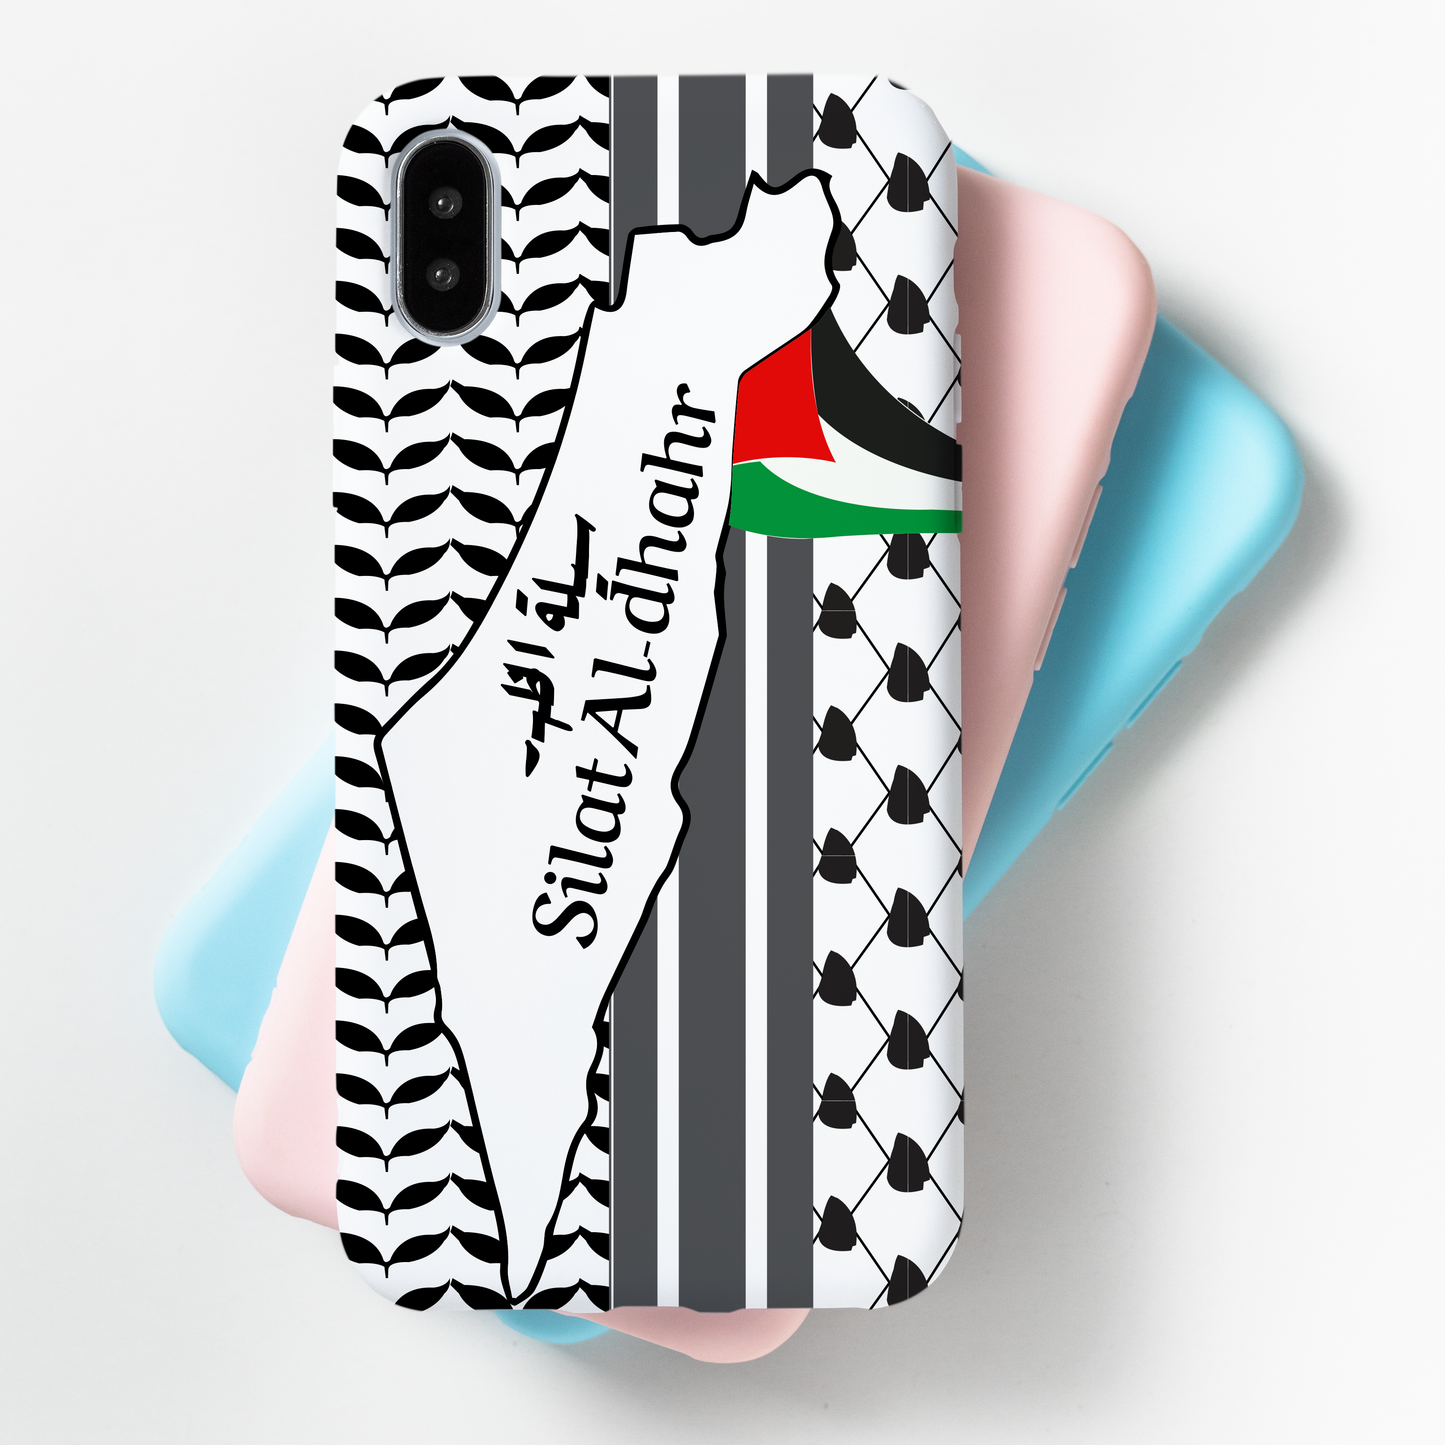 Palestinian Heritage: Artistic Phone Cases